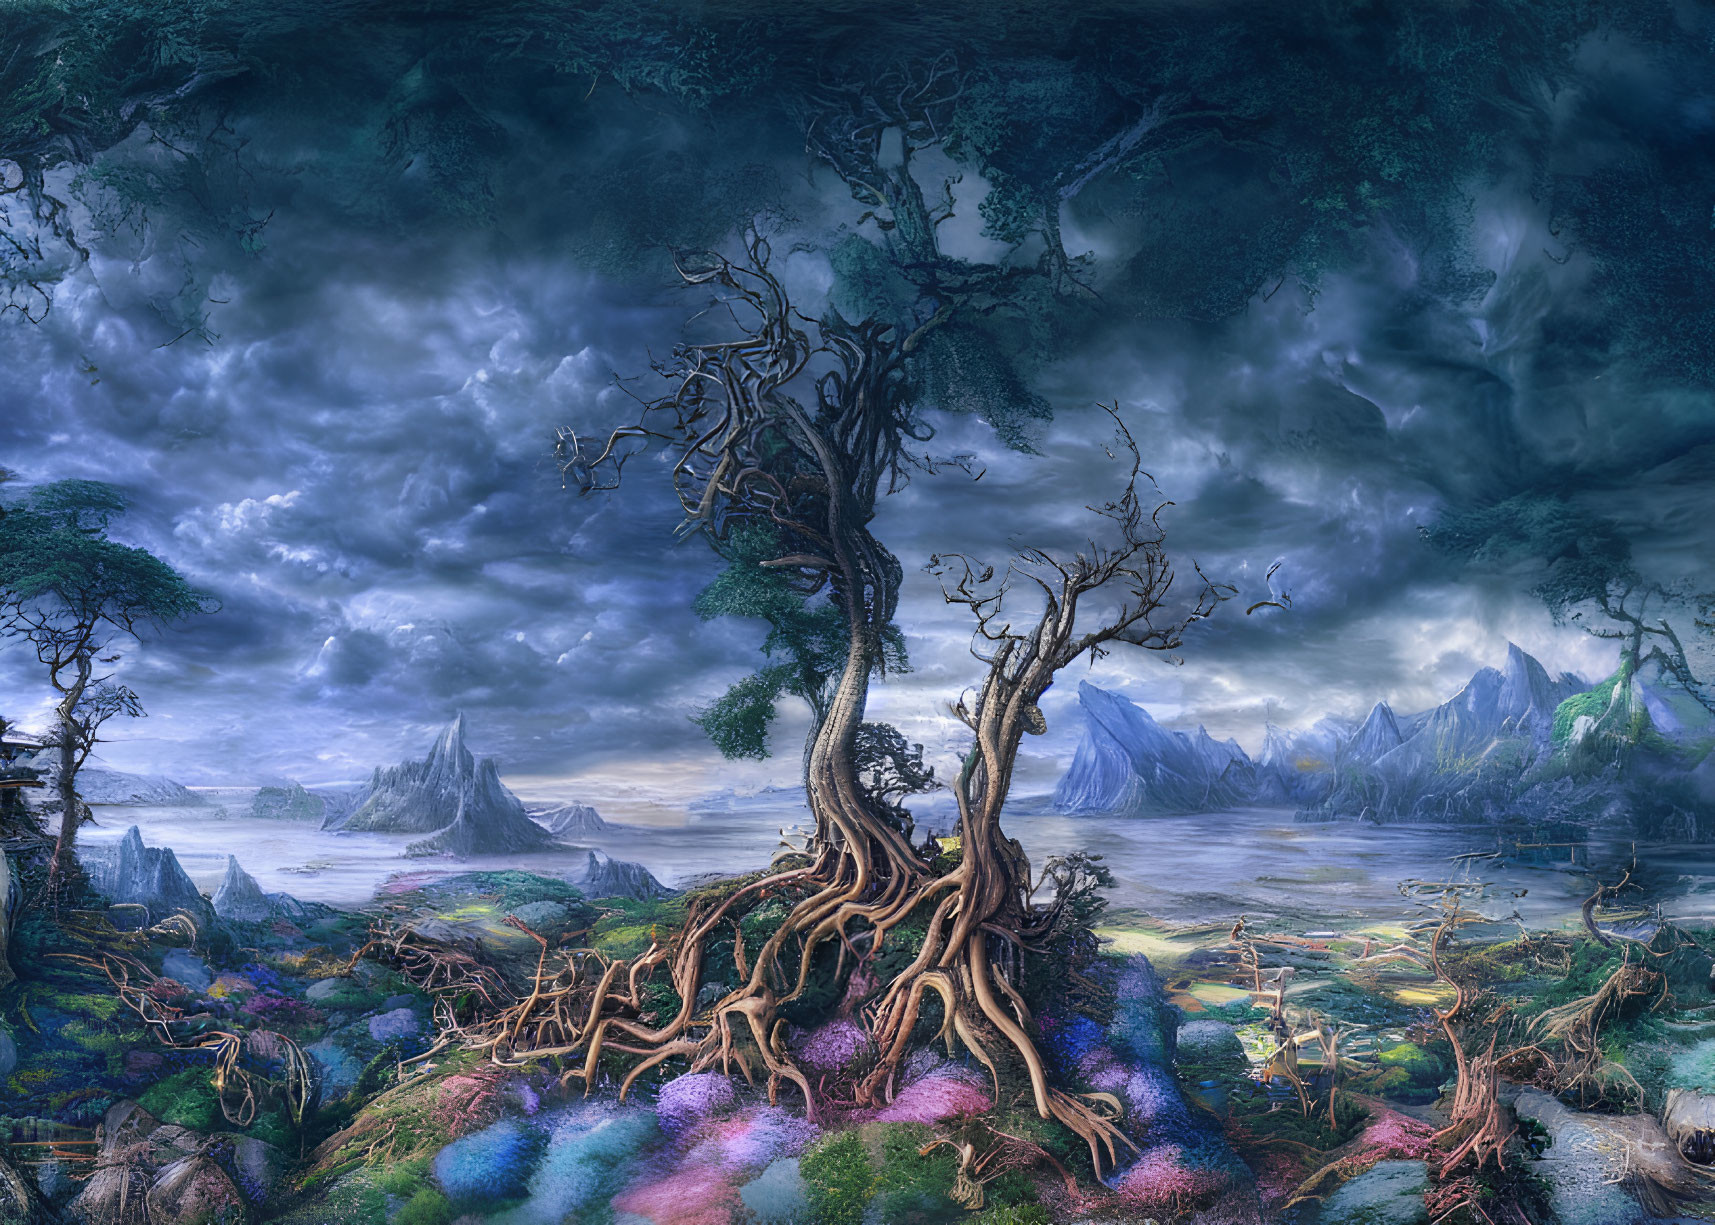 Mystical landscape with ancient tree, dramatic sky, mountains, flora, and mist